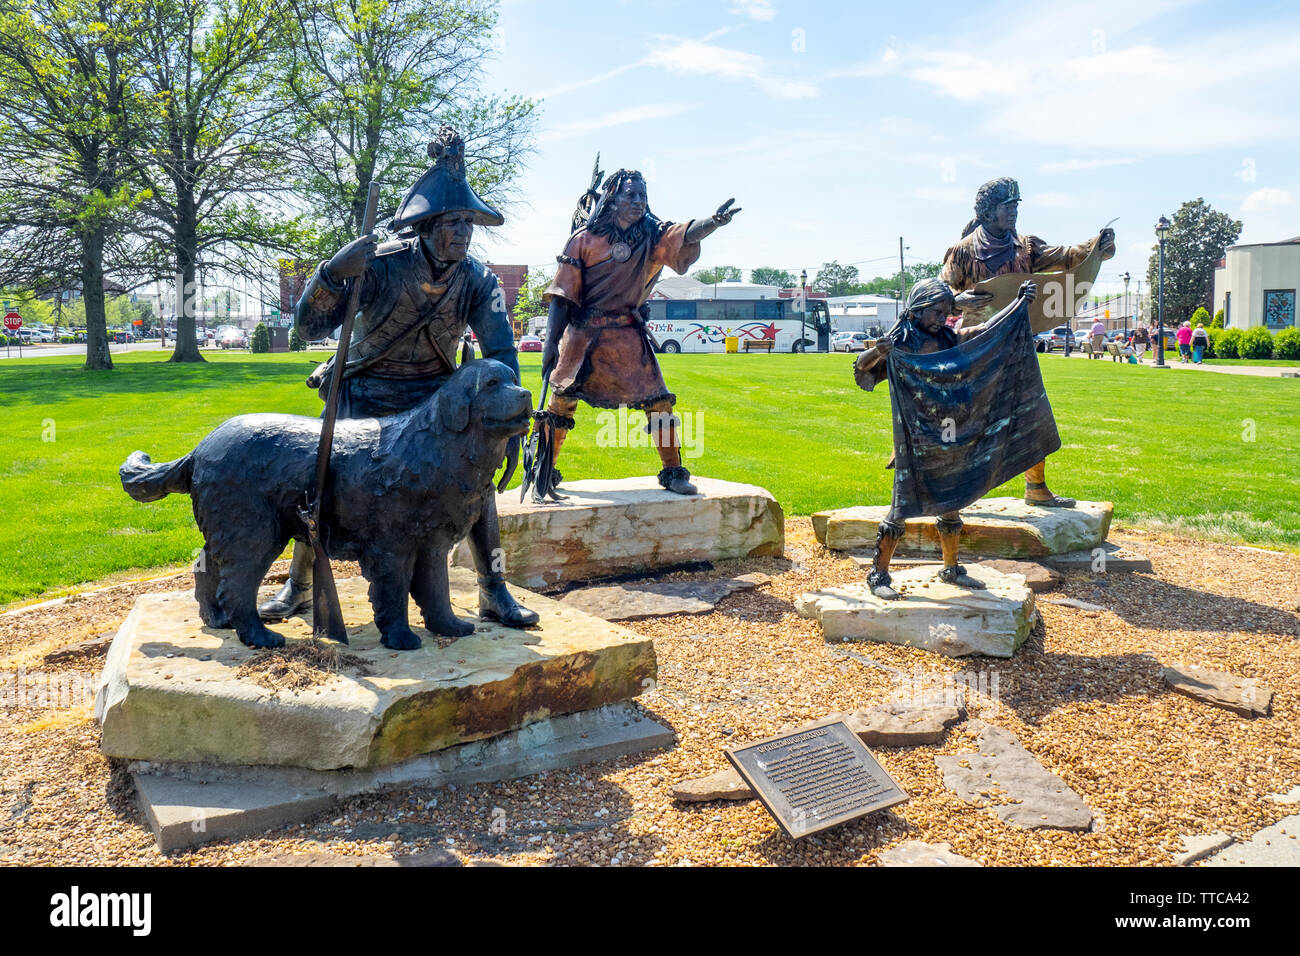 On the Trail of Discovery sculpture by George Lundeen depicting Meriwether Lewis, William Clark a native American man and girl, Paducah  Kentucky USA Stock Photo